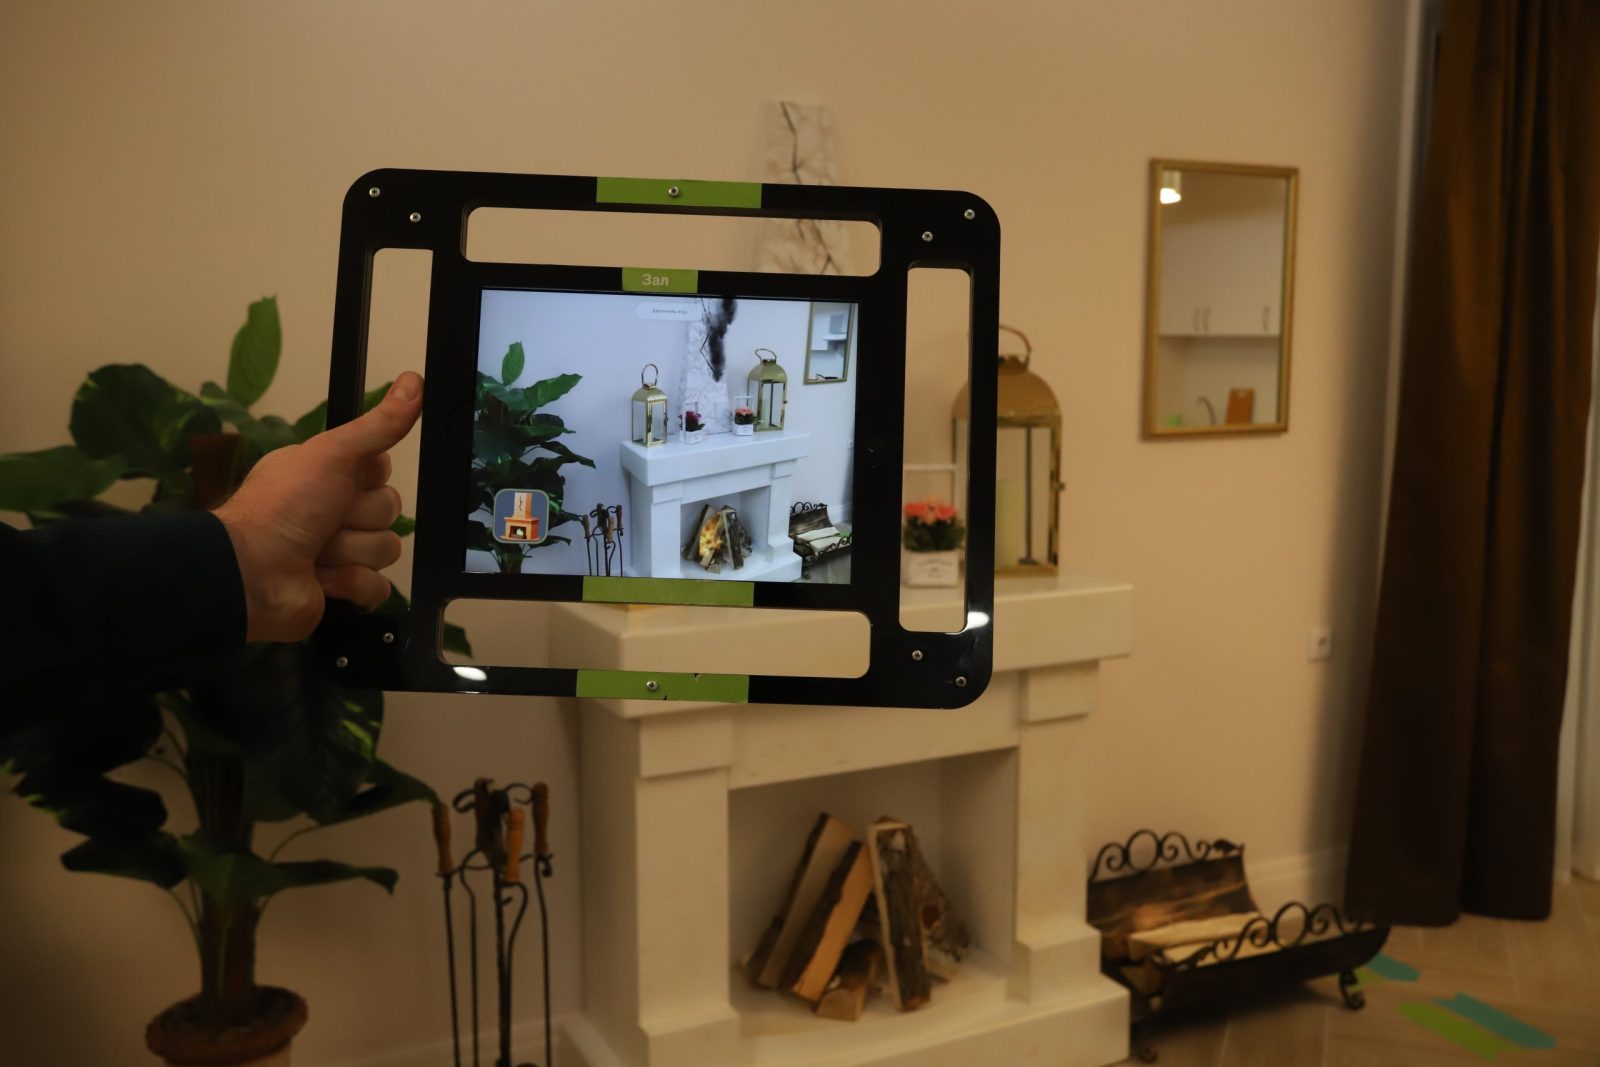 Residential premises with fire safety violations. Augmented reality